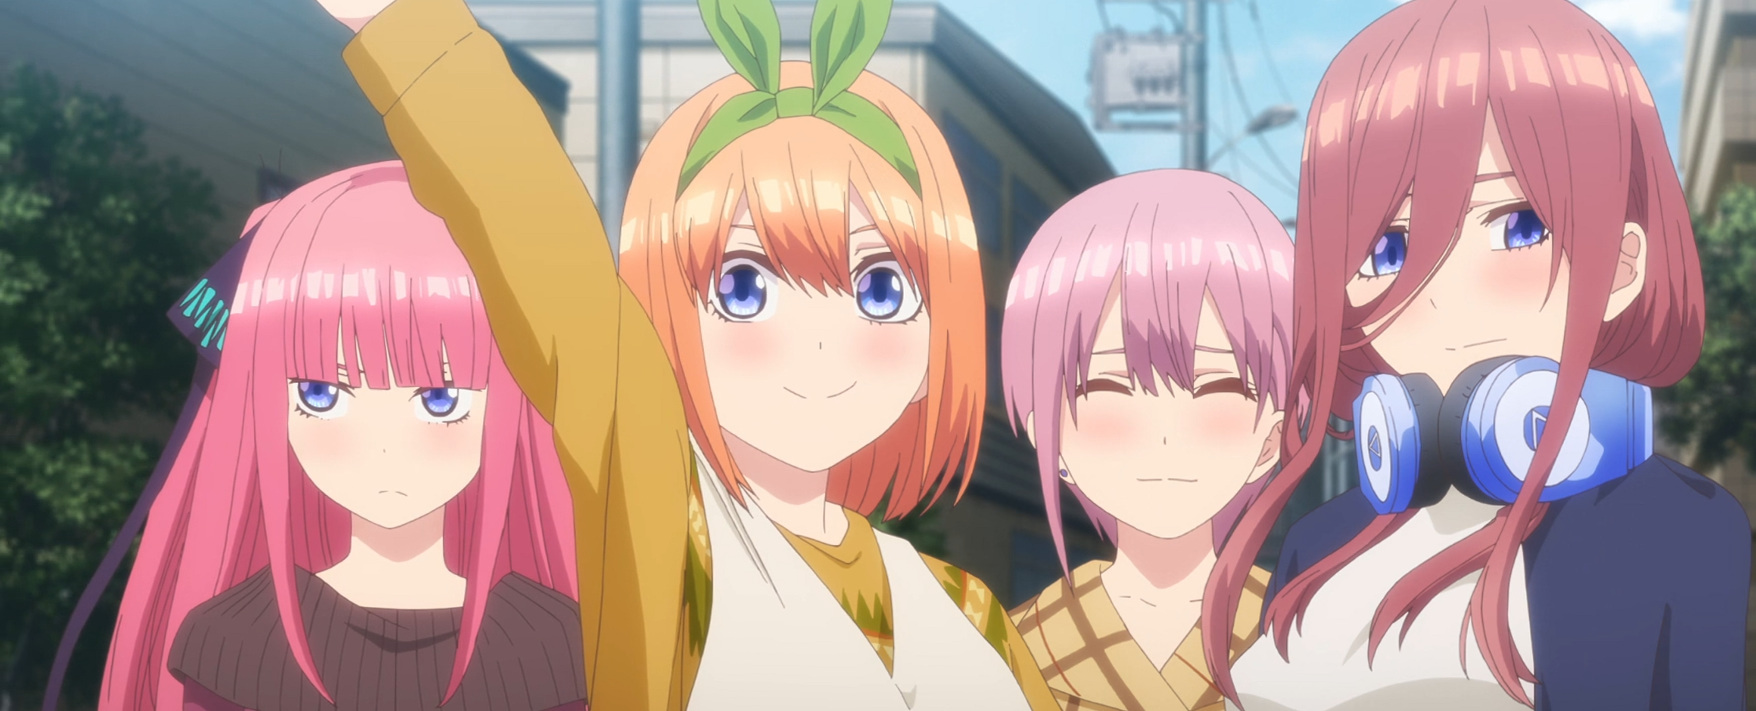 Catching All the Skipped Content from Episode 10 of Go-toubun no Hanayome ∬